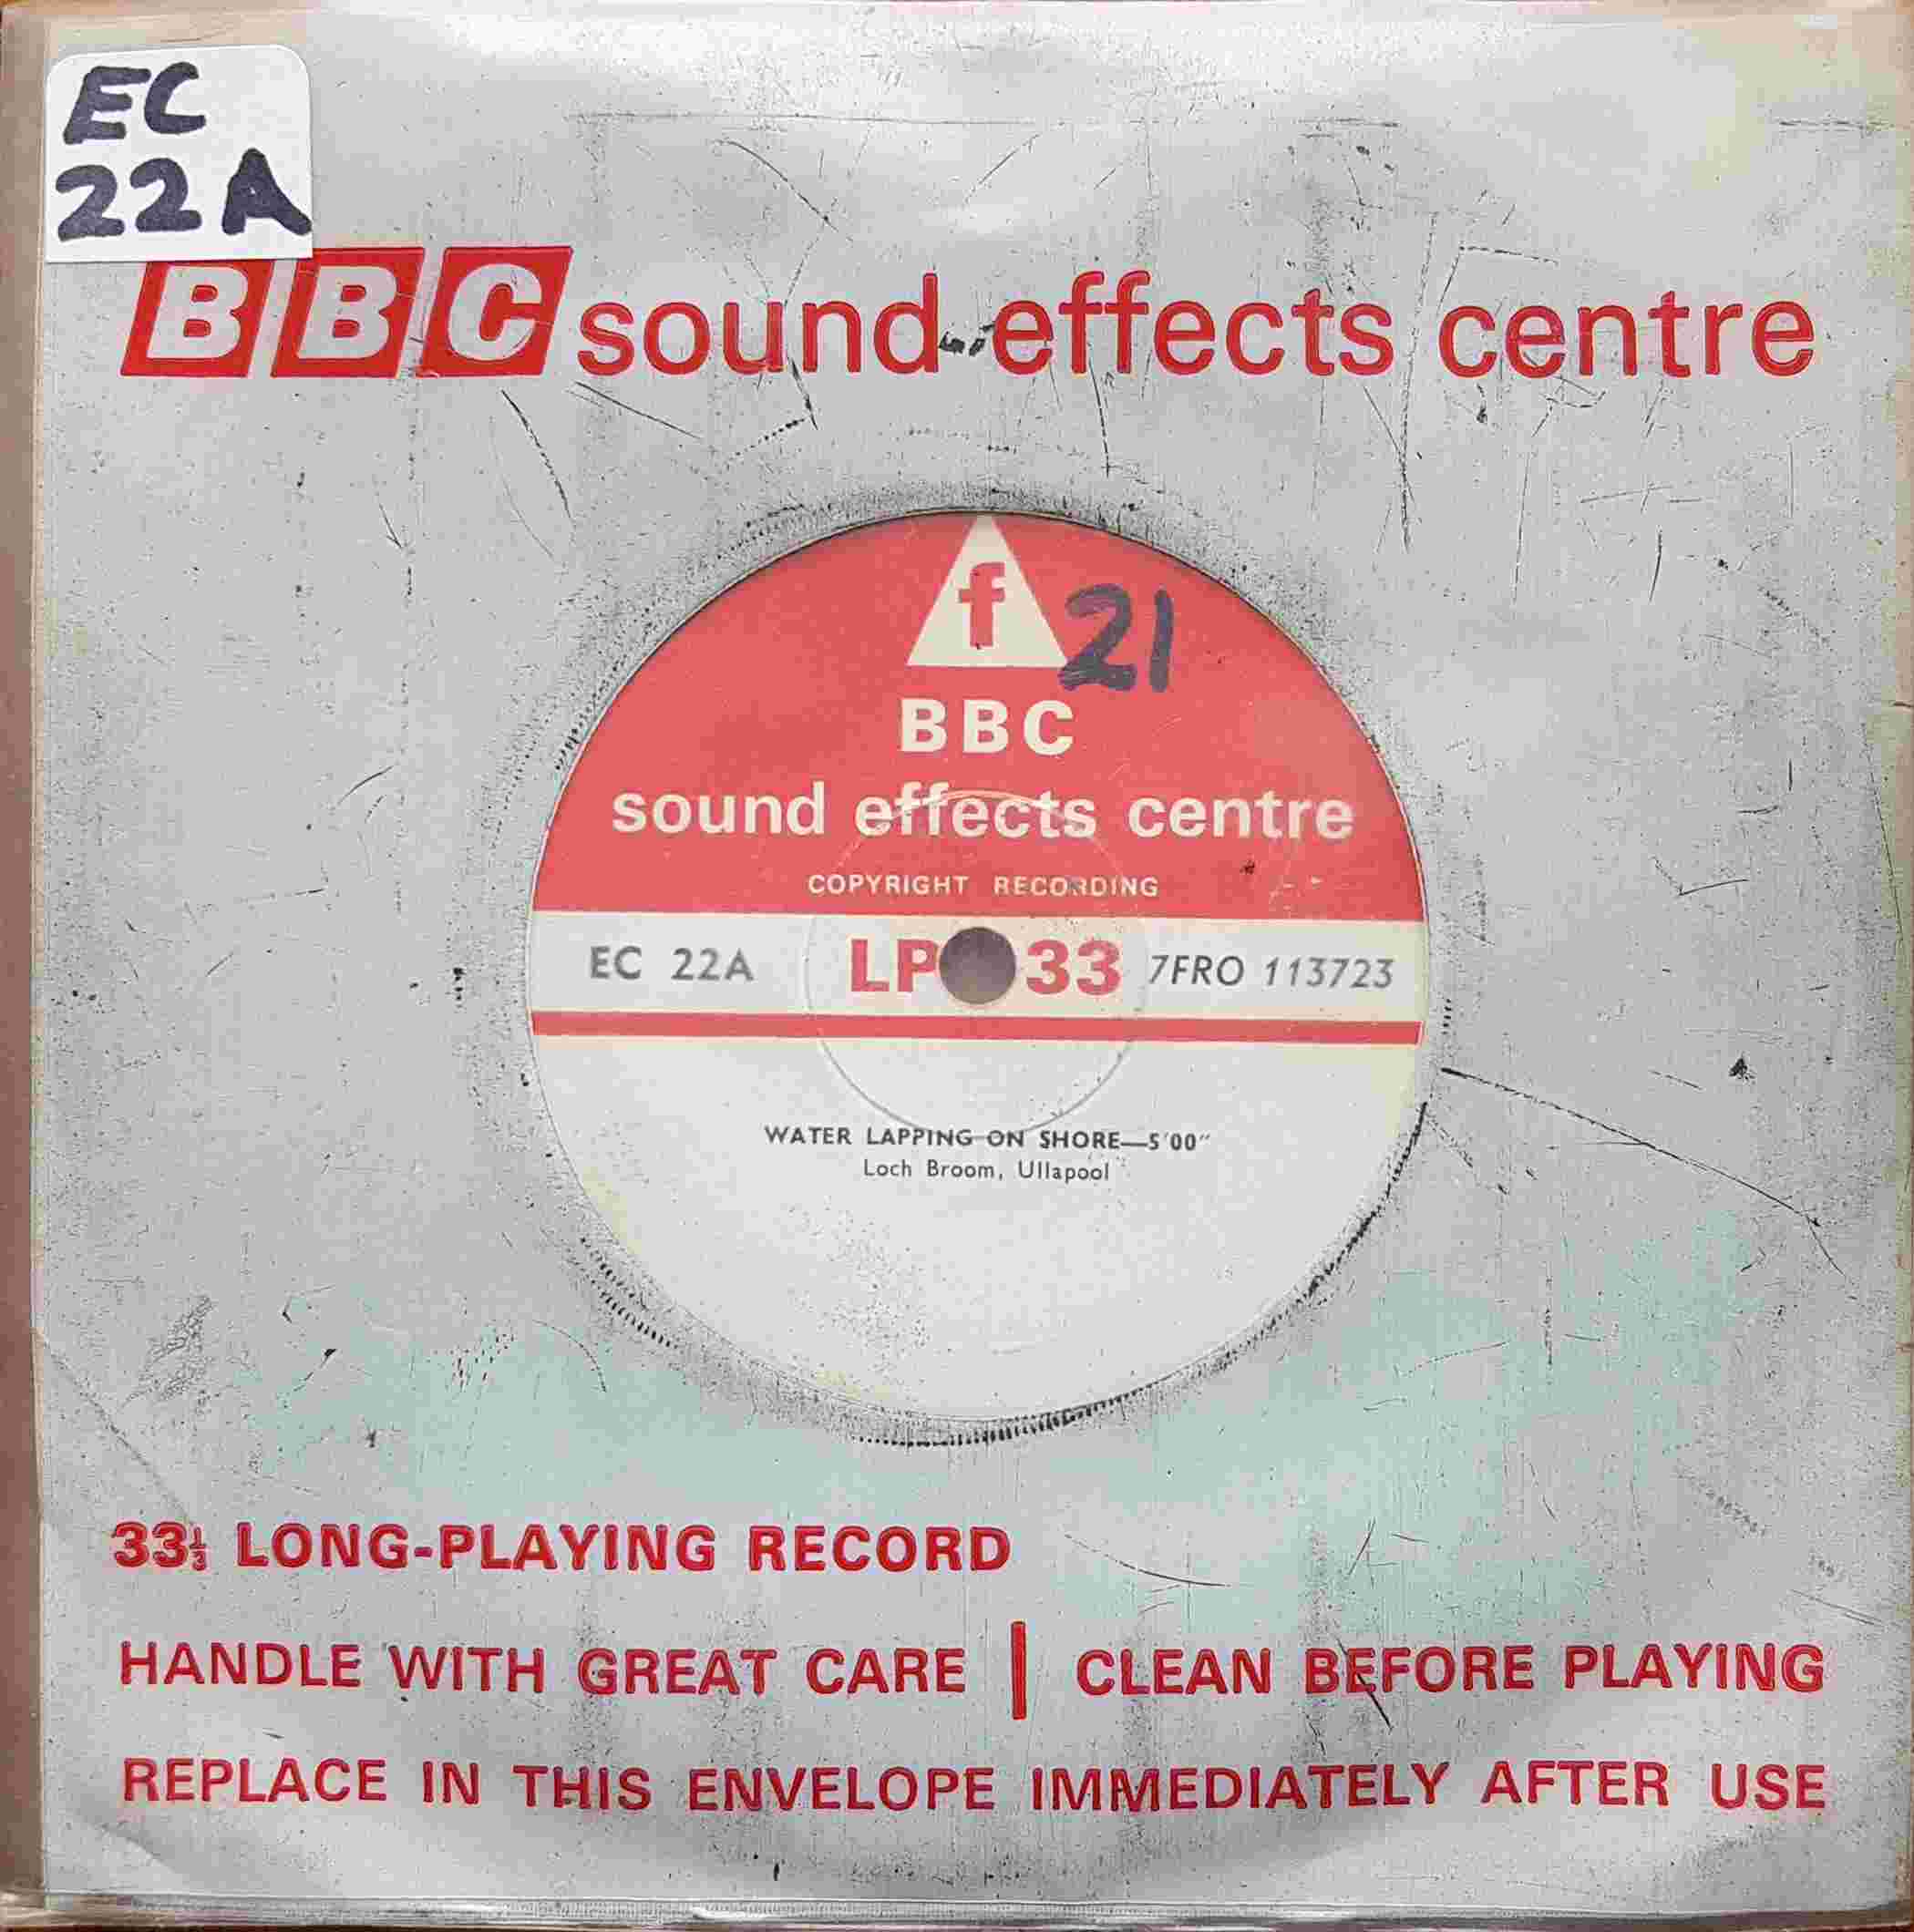 Picture of EC 22A Water lapping on shore / Mountain stream by artist Not registered from the BBC singles - Records and Tapes library